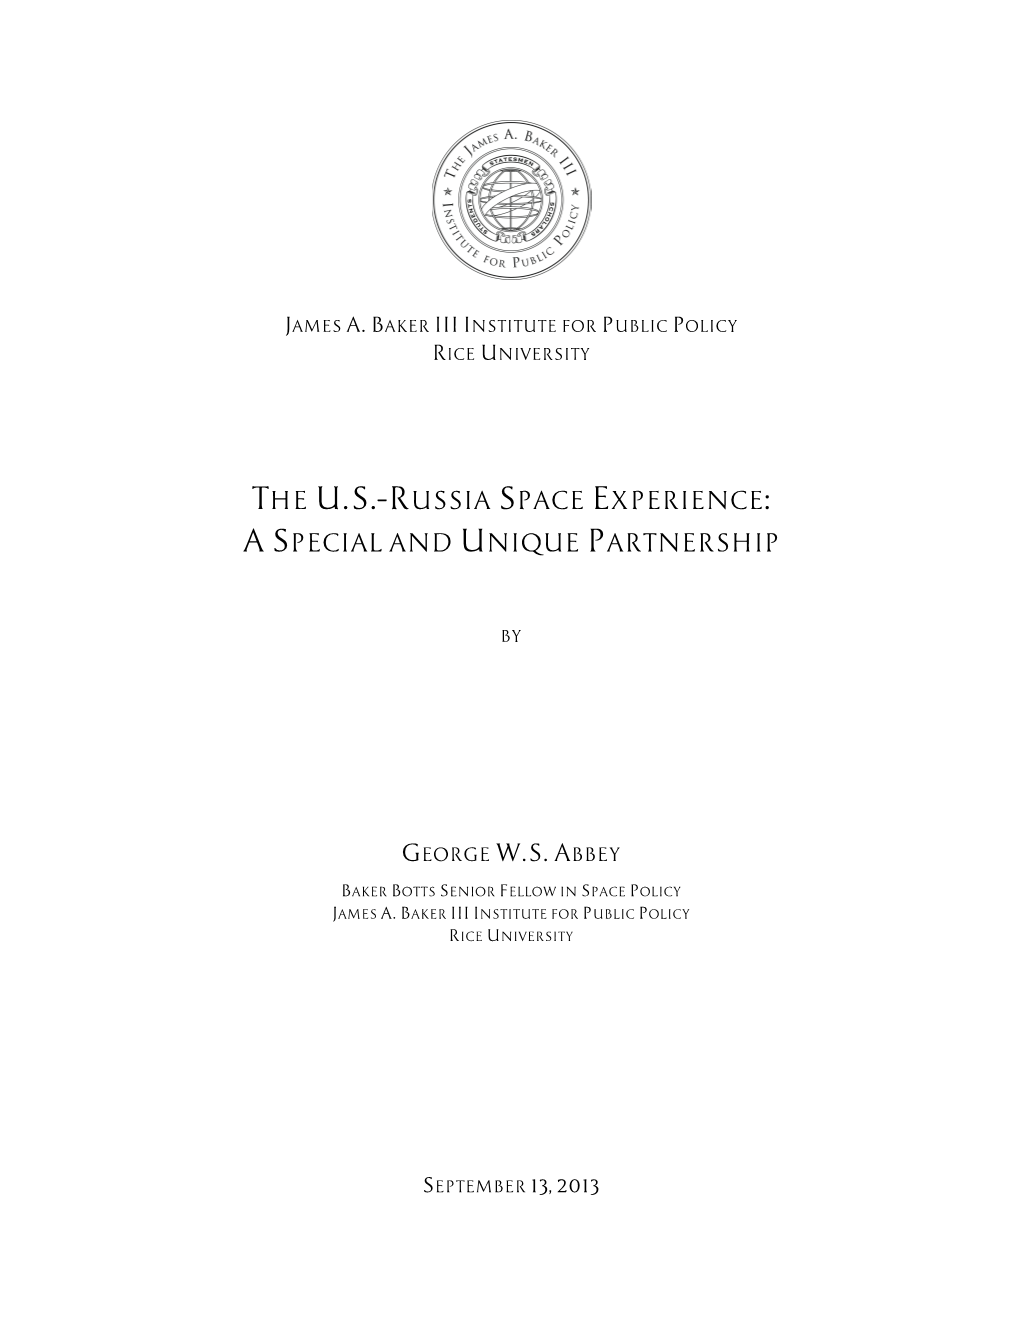 The U.S.–Russia Space Experience: a Special and Unique Partnership